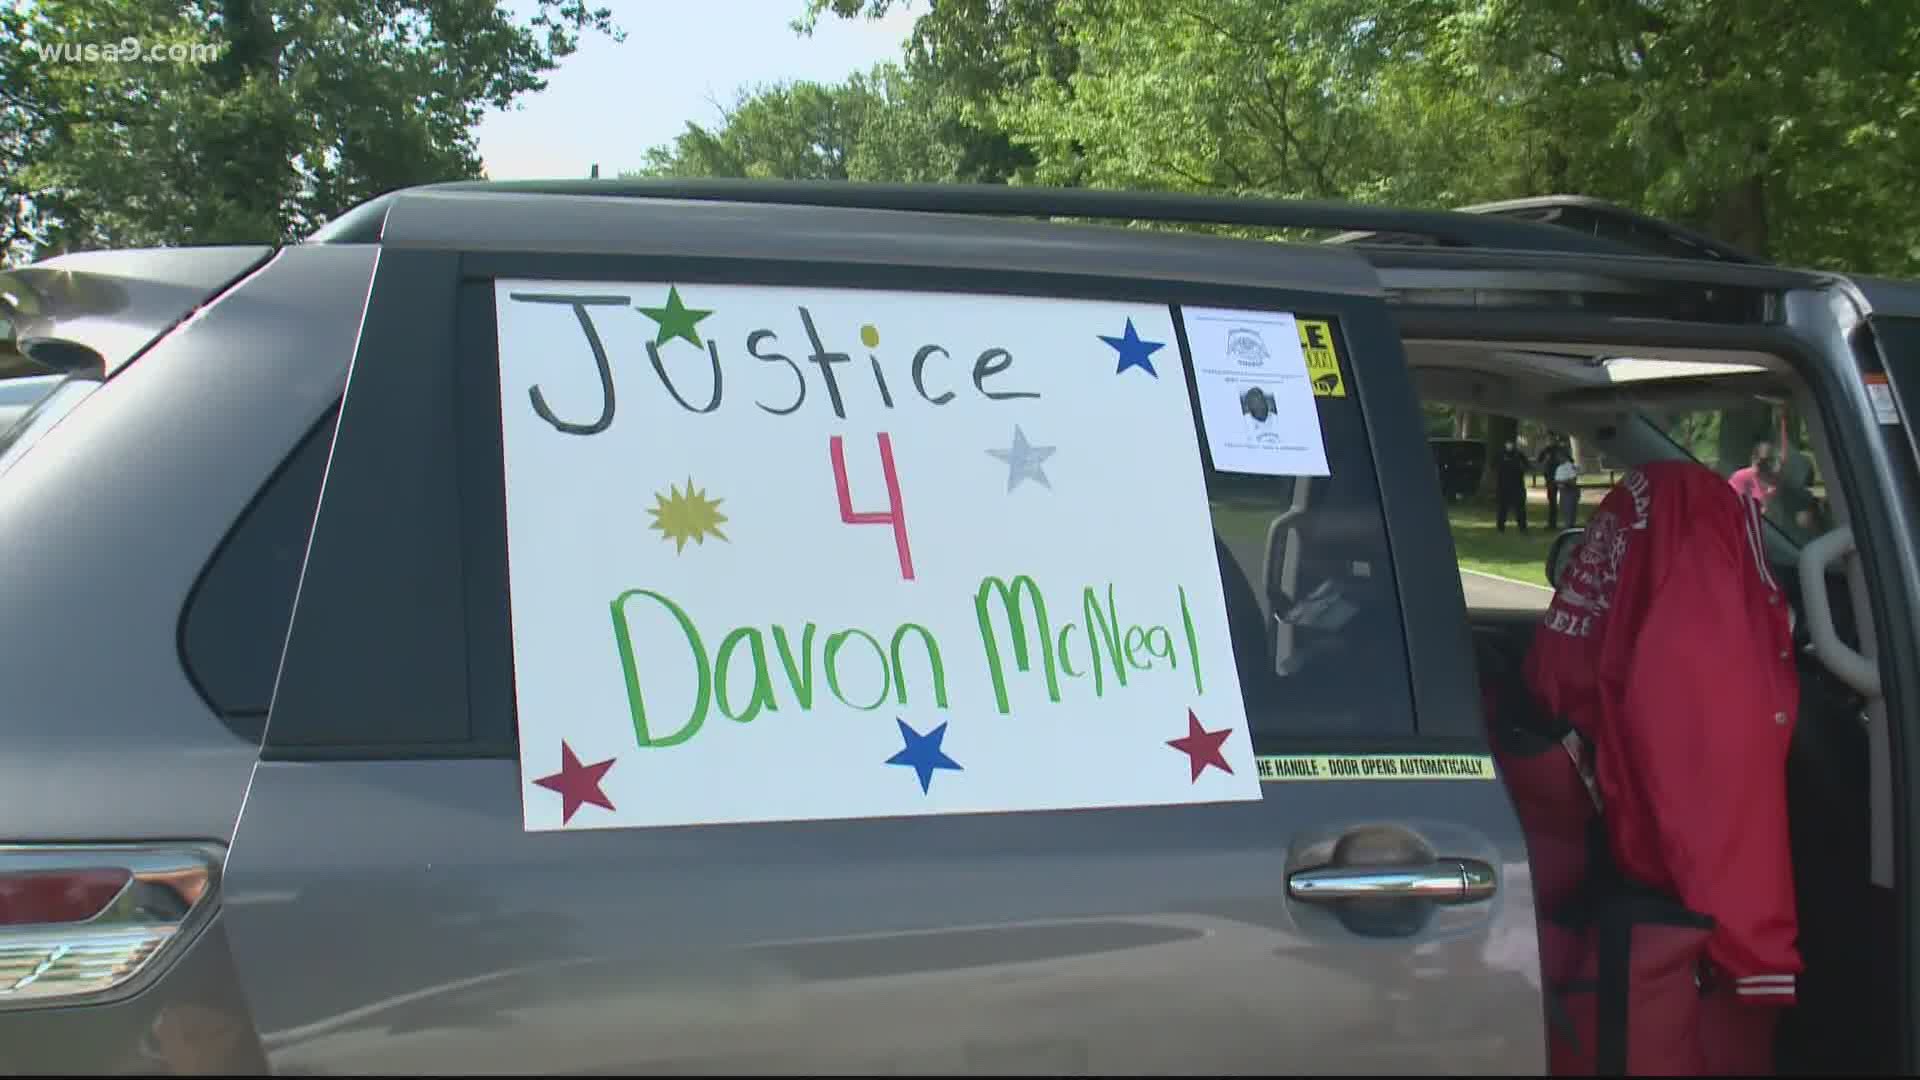 One man wants to help honor the life of Davon McNeal by helping others.